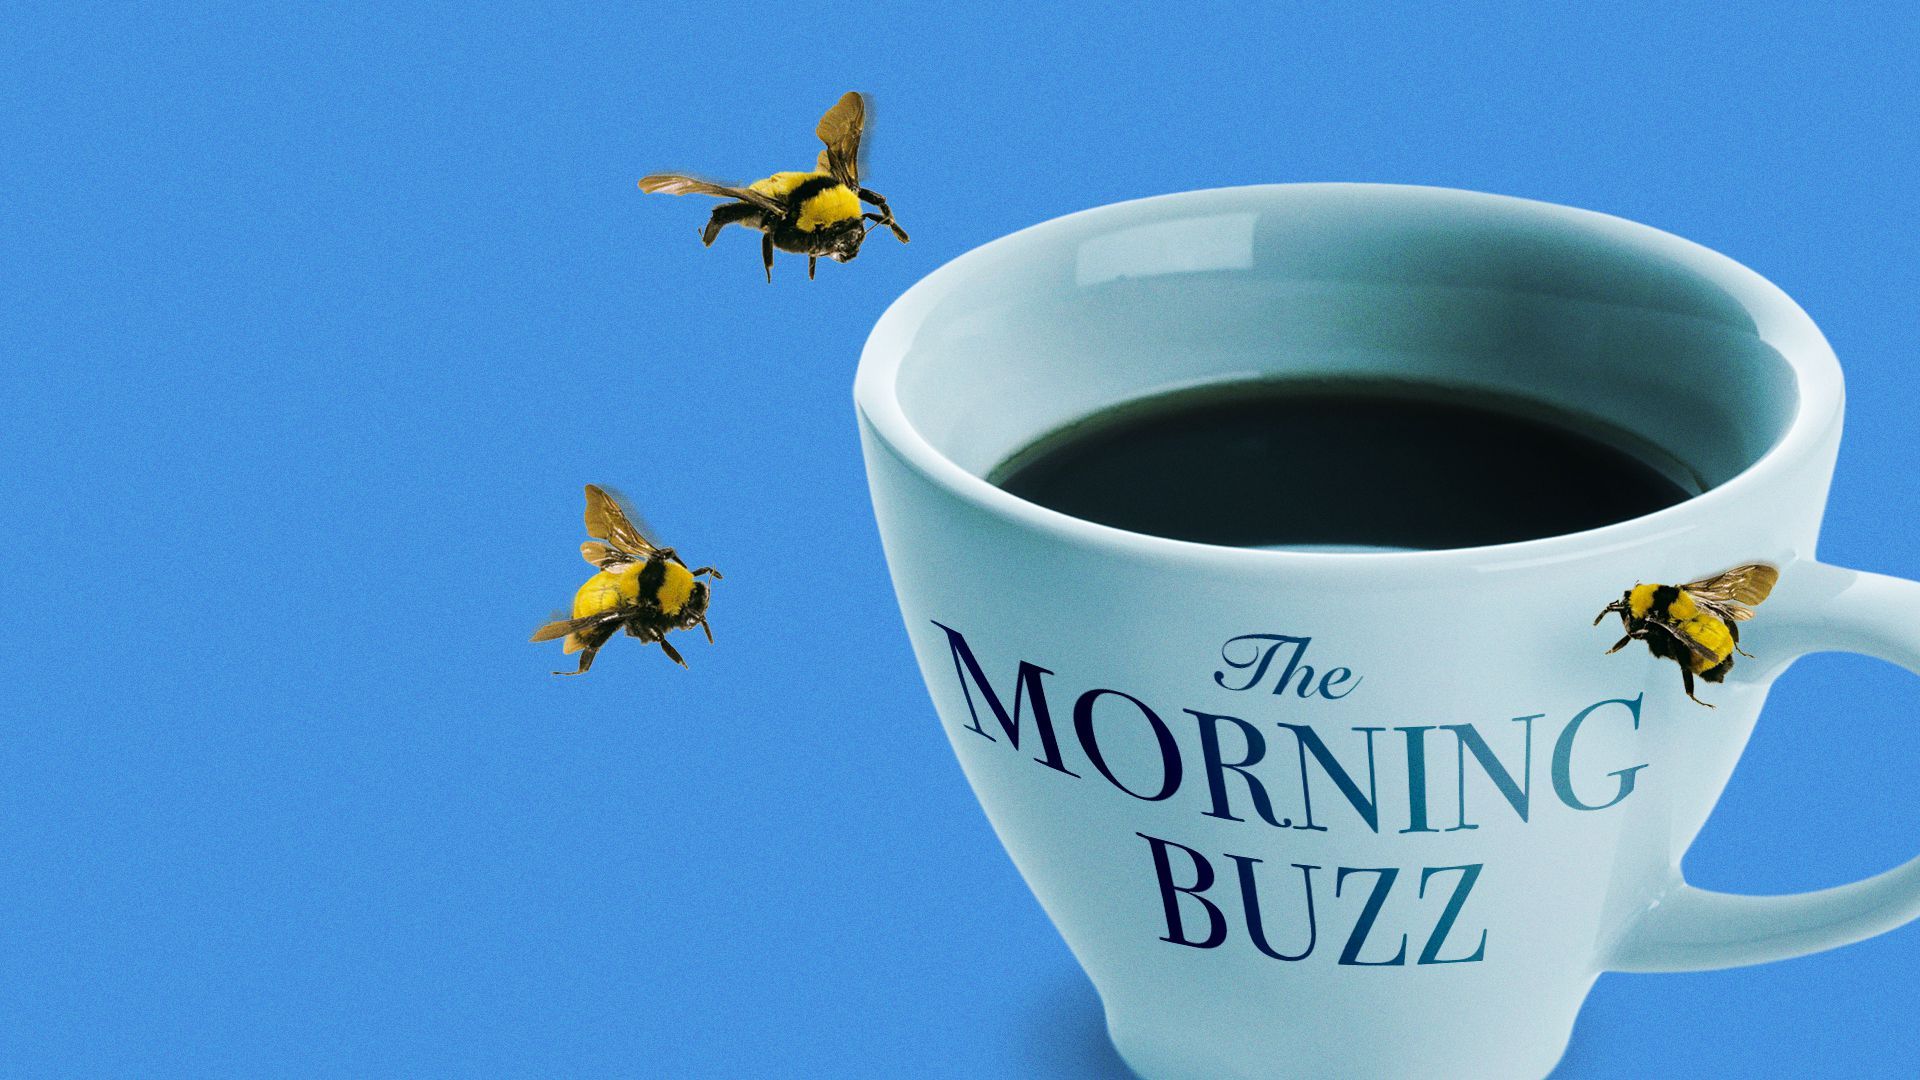 Illustration of a coffee mug that says "The Morning Buzz" with bees flying around. 